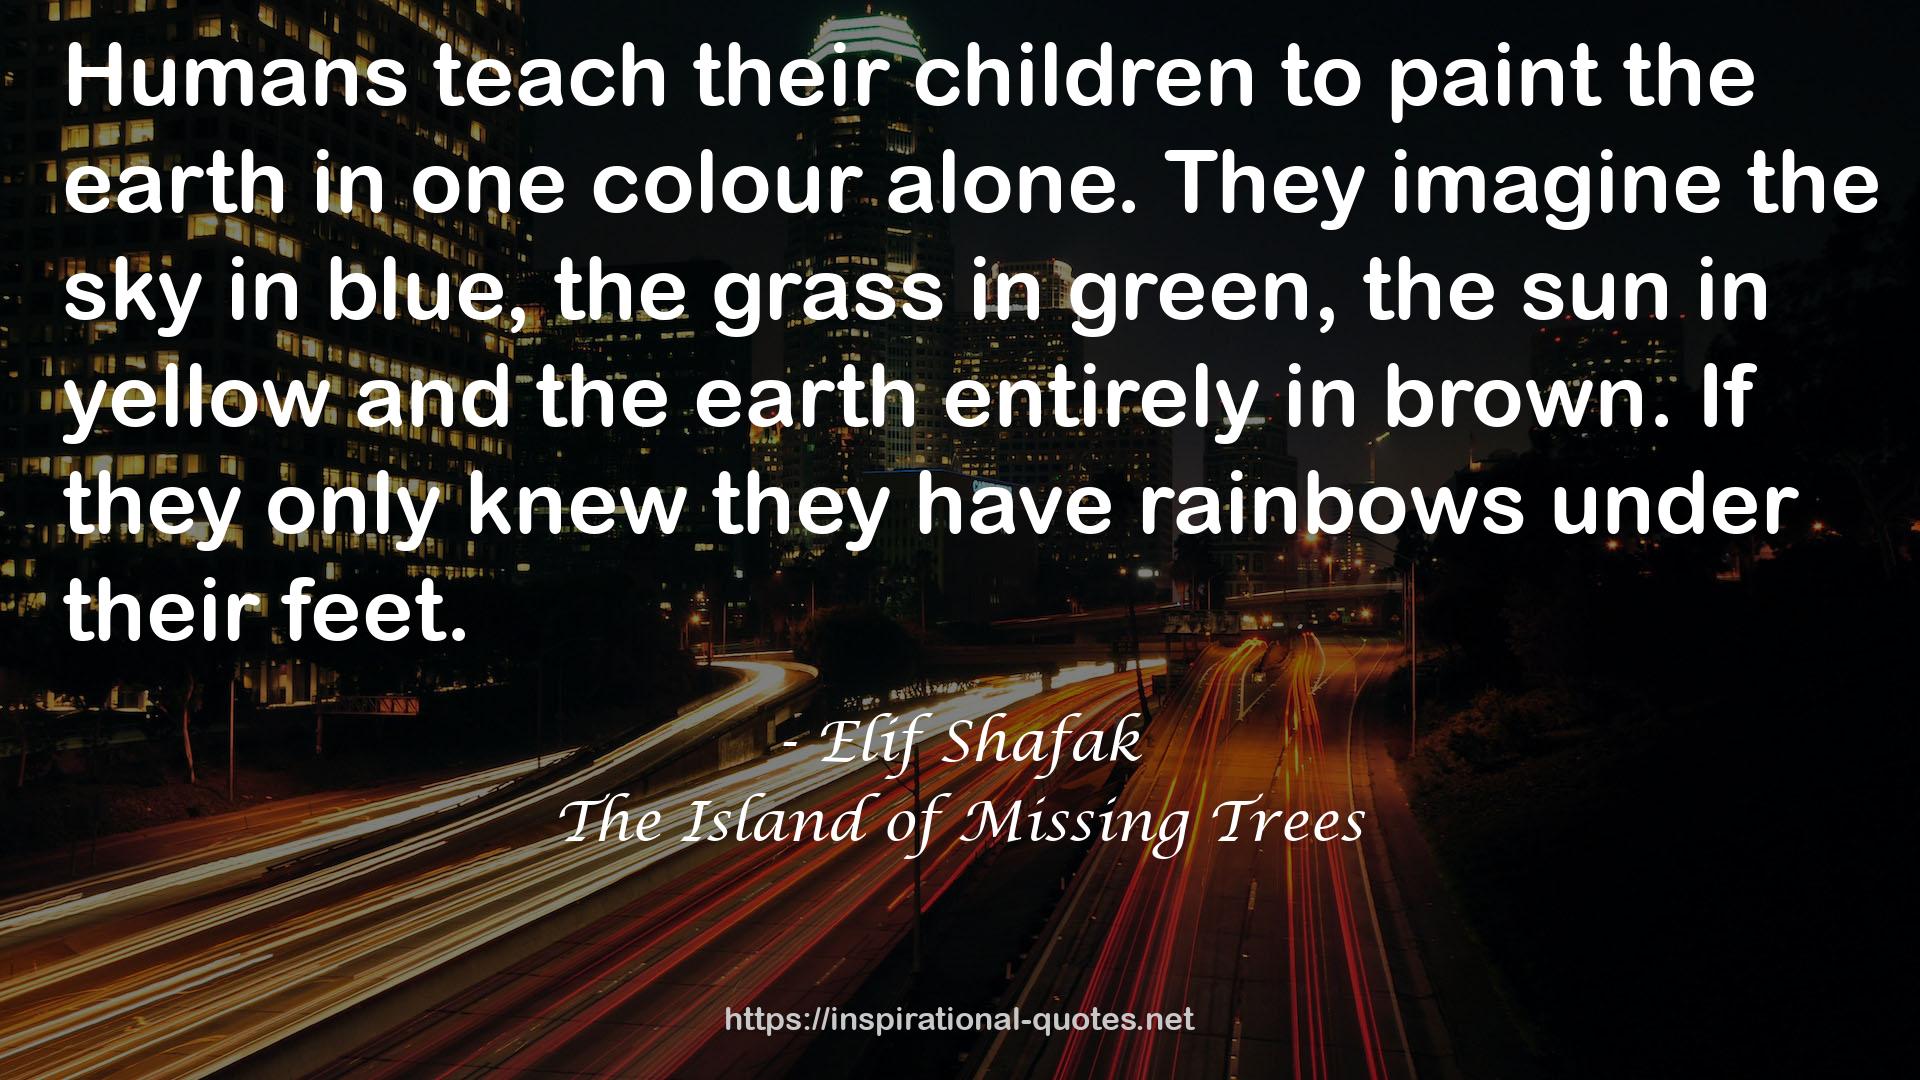 The Island of Missing Trees QUOTES